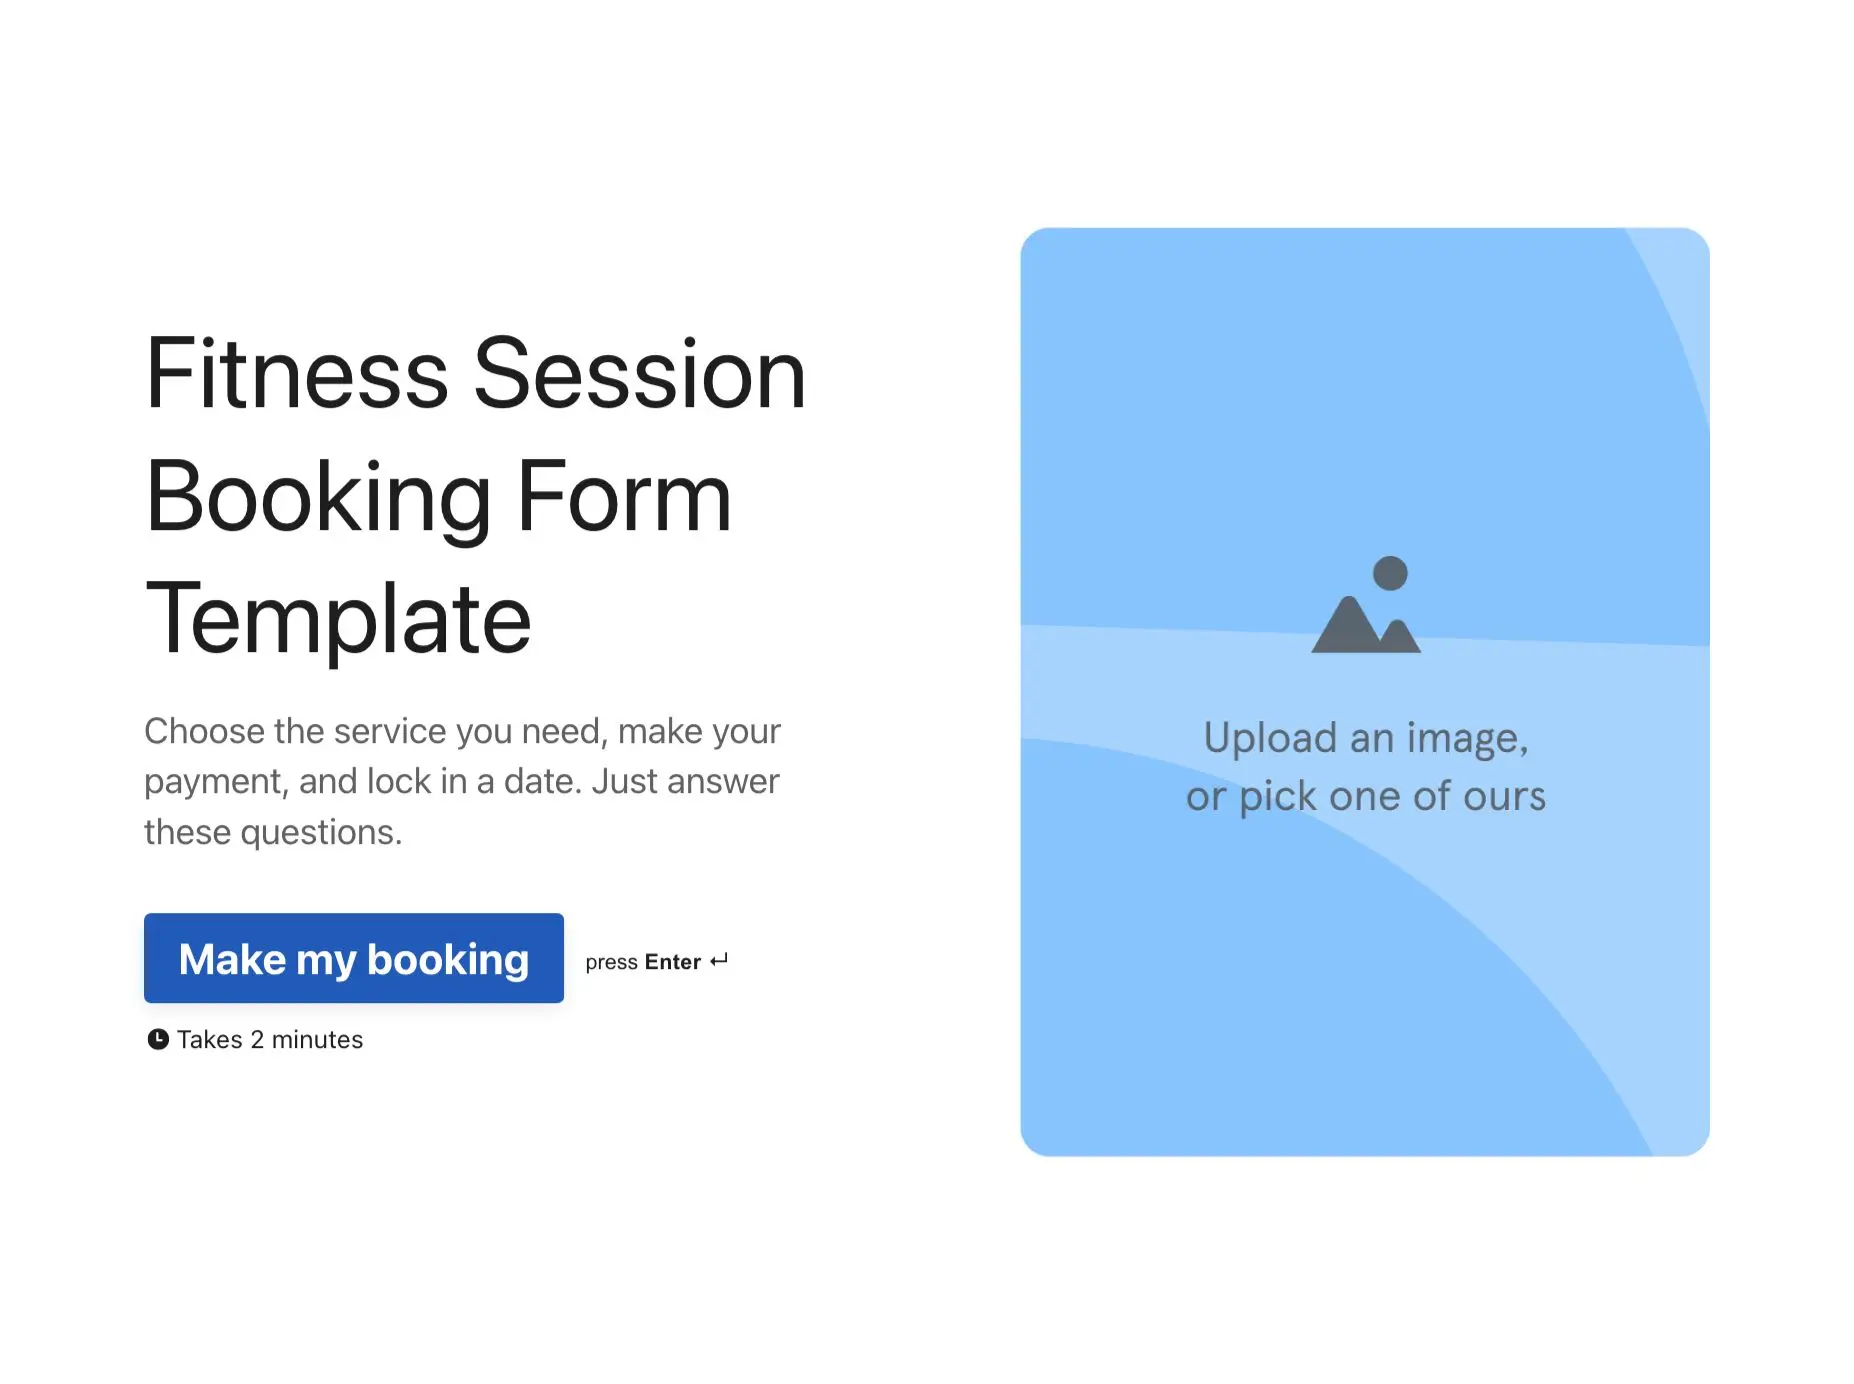 Fitness Session Booking Form Template Hero